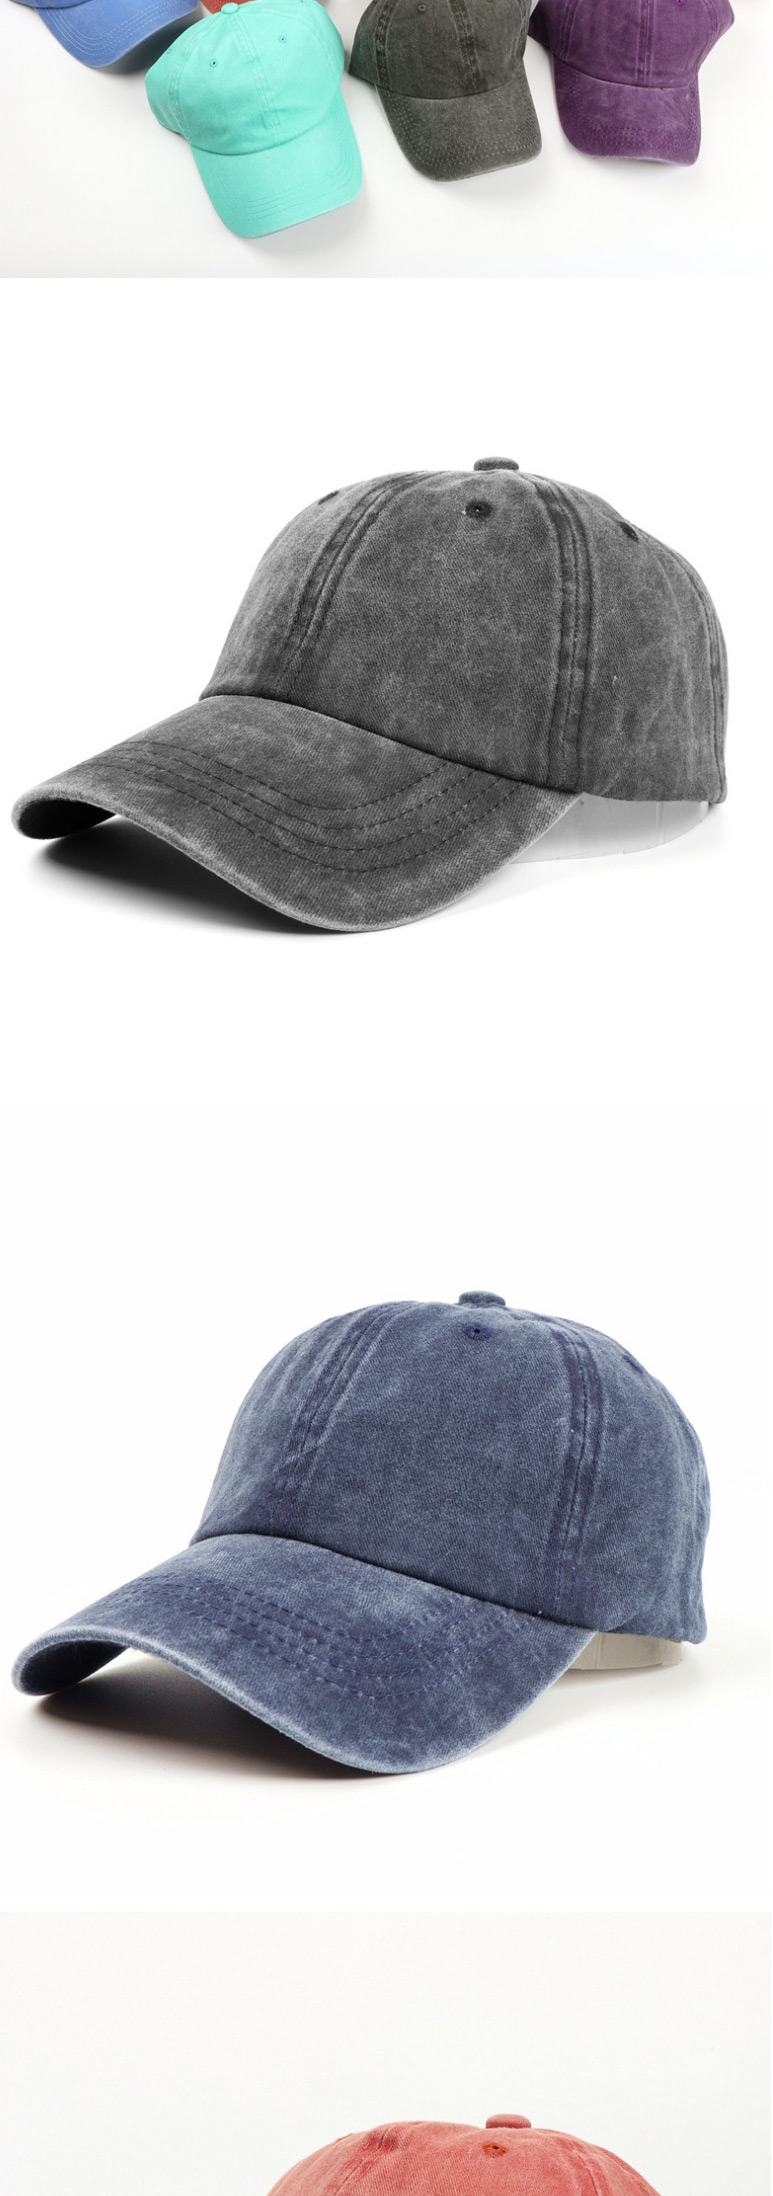 Fashion Ginger Washed Distressed Denim Soft Top And Curved Brim Cap,Baseball Caps